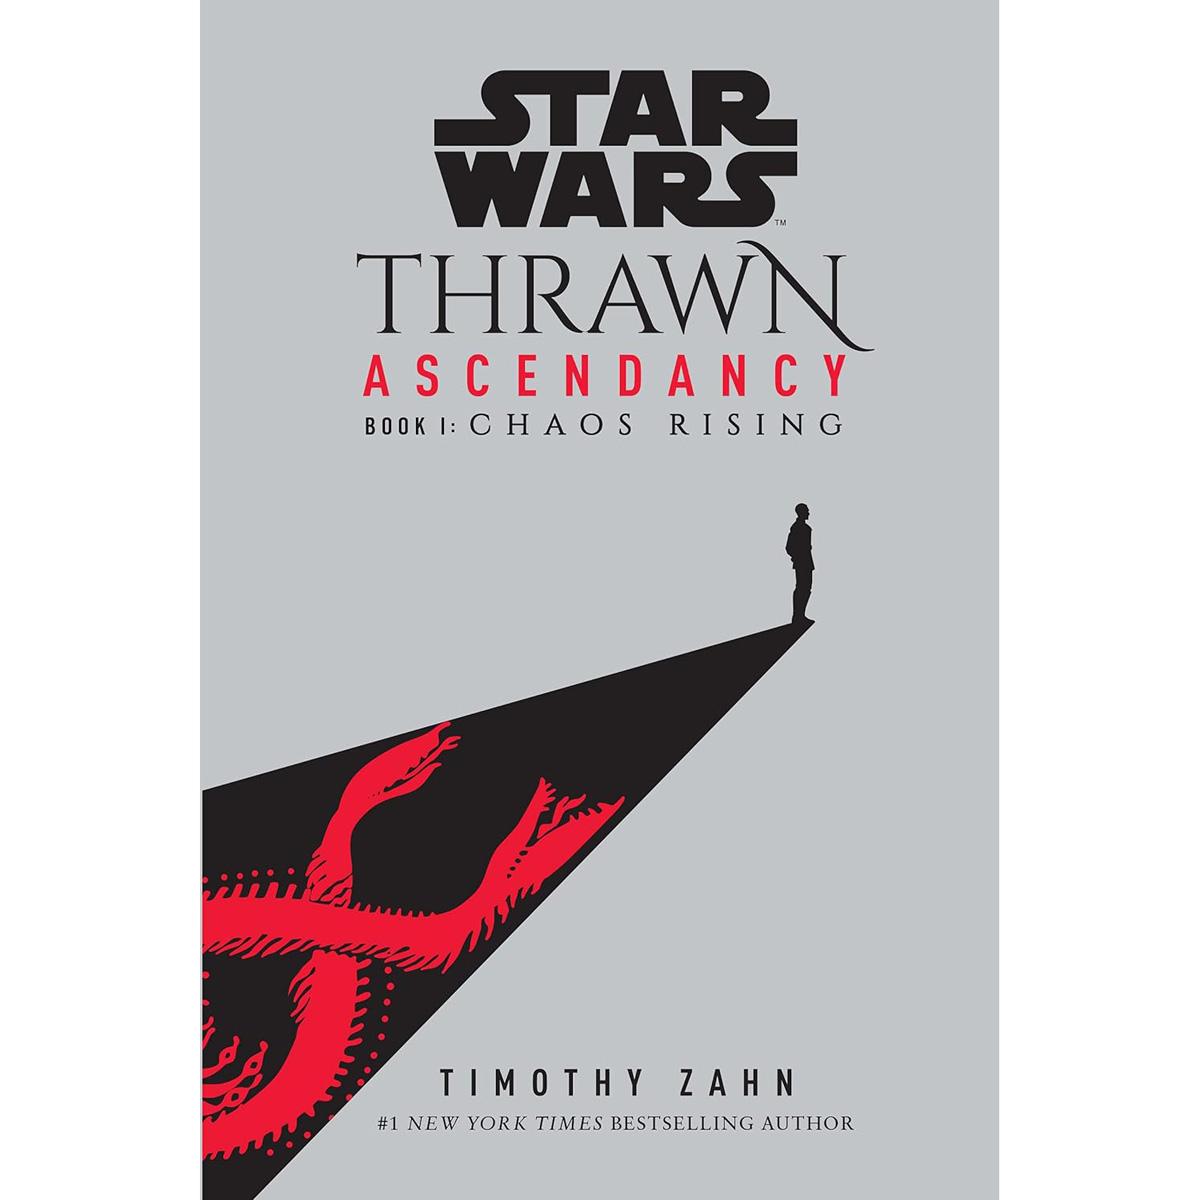 Star Wars Thrawn Ascendancy Book 1 Chaos Rising eBook for $1.99